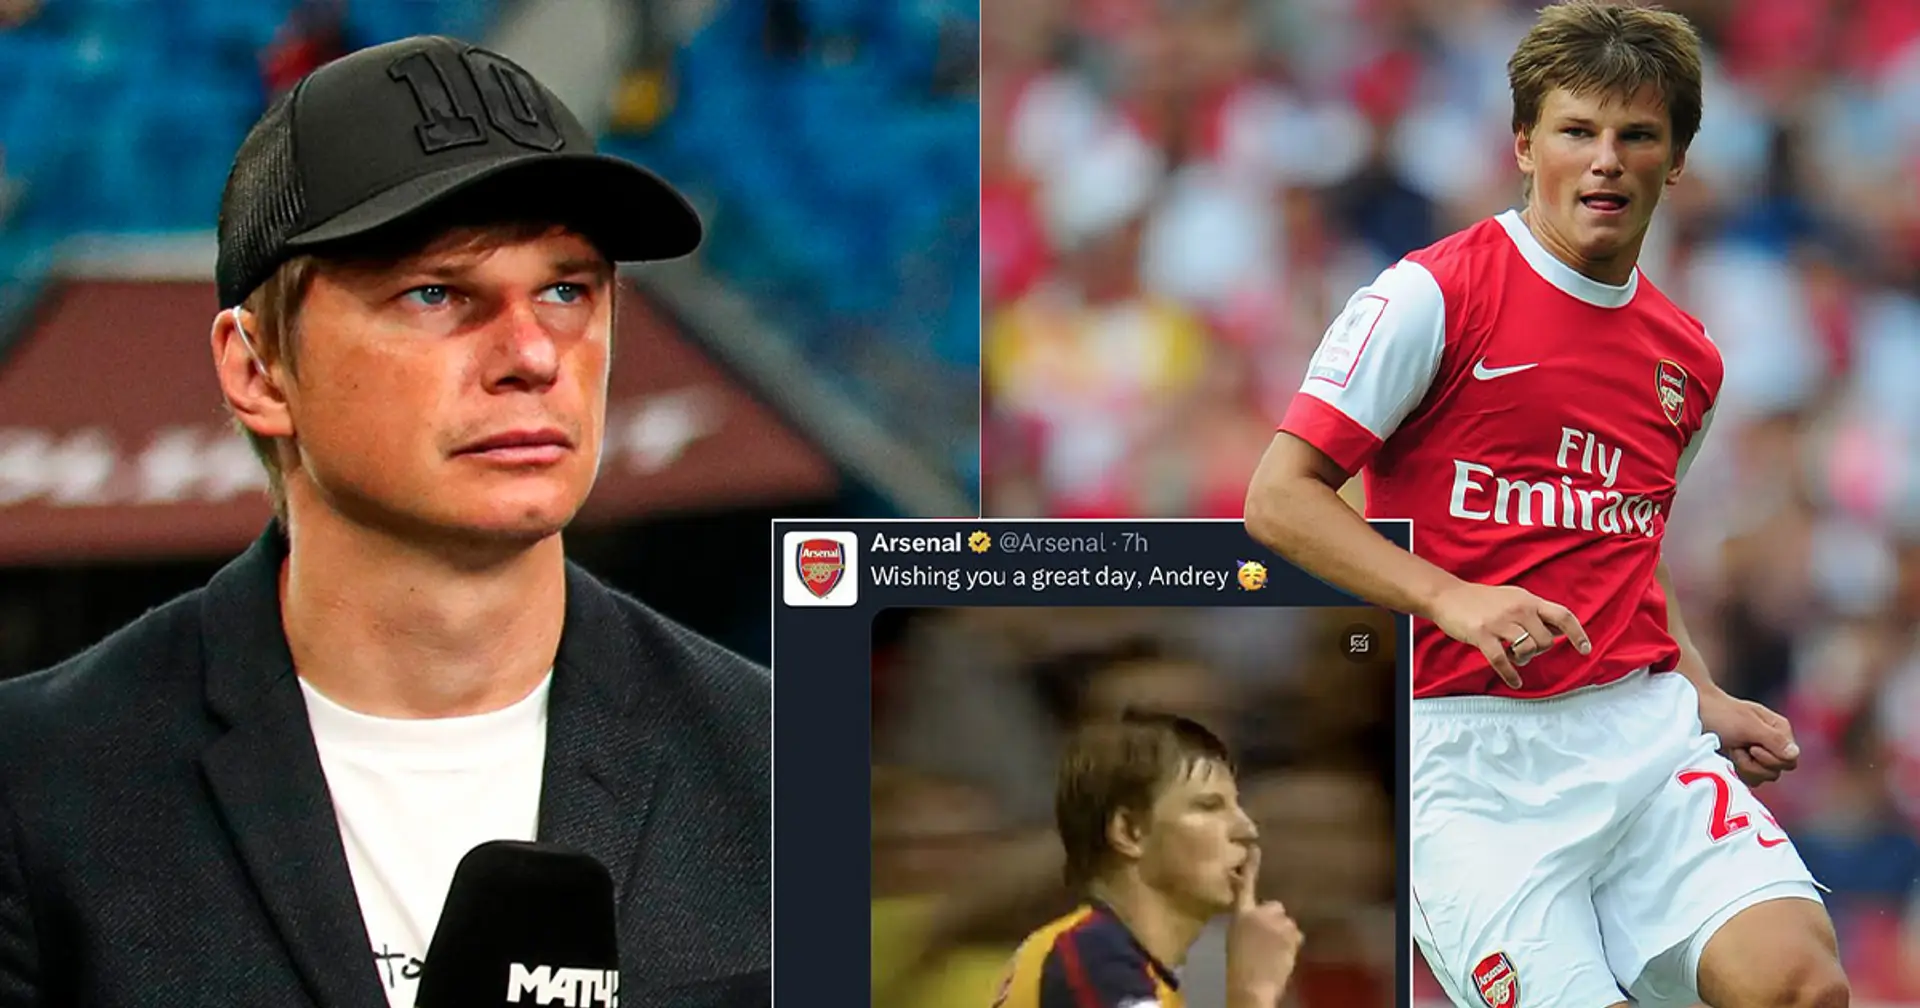 'That's it, to be honest': Andrey Arshavin finally reacts to Arsenal deleting a birthday tweet